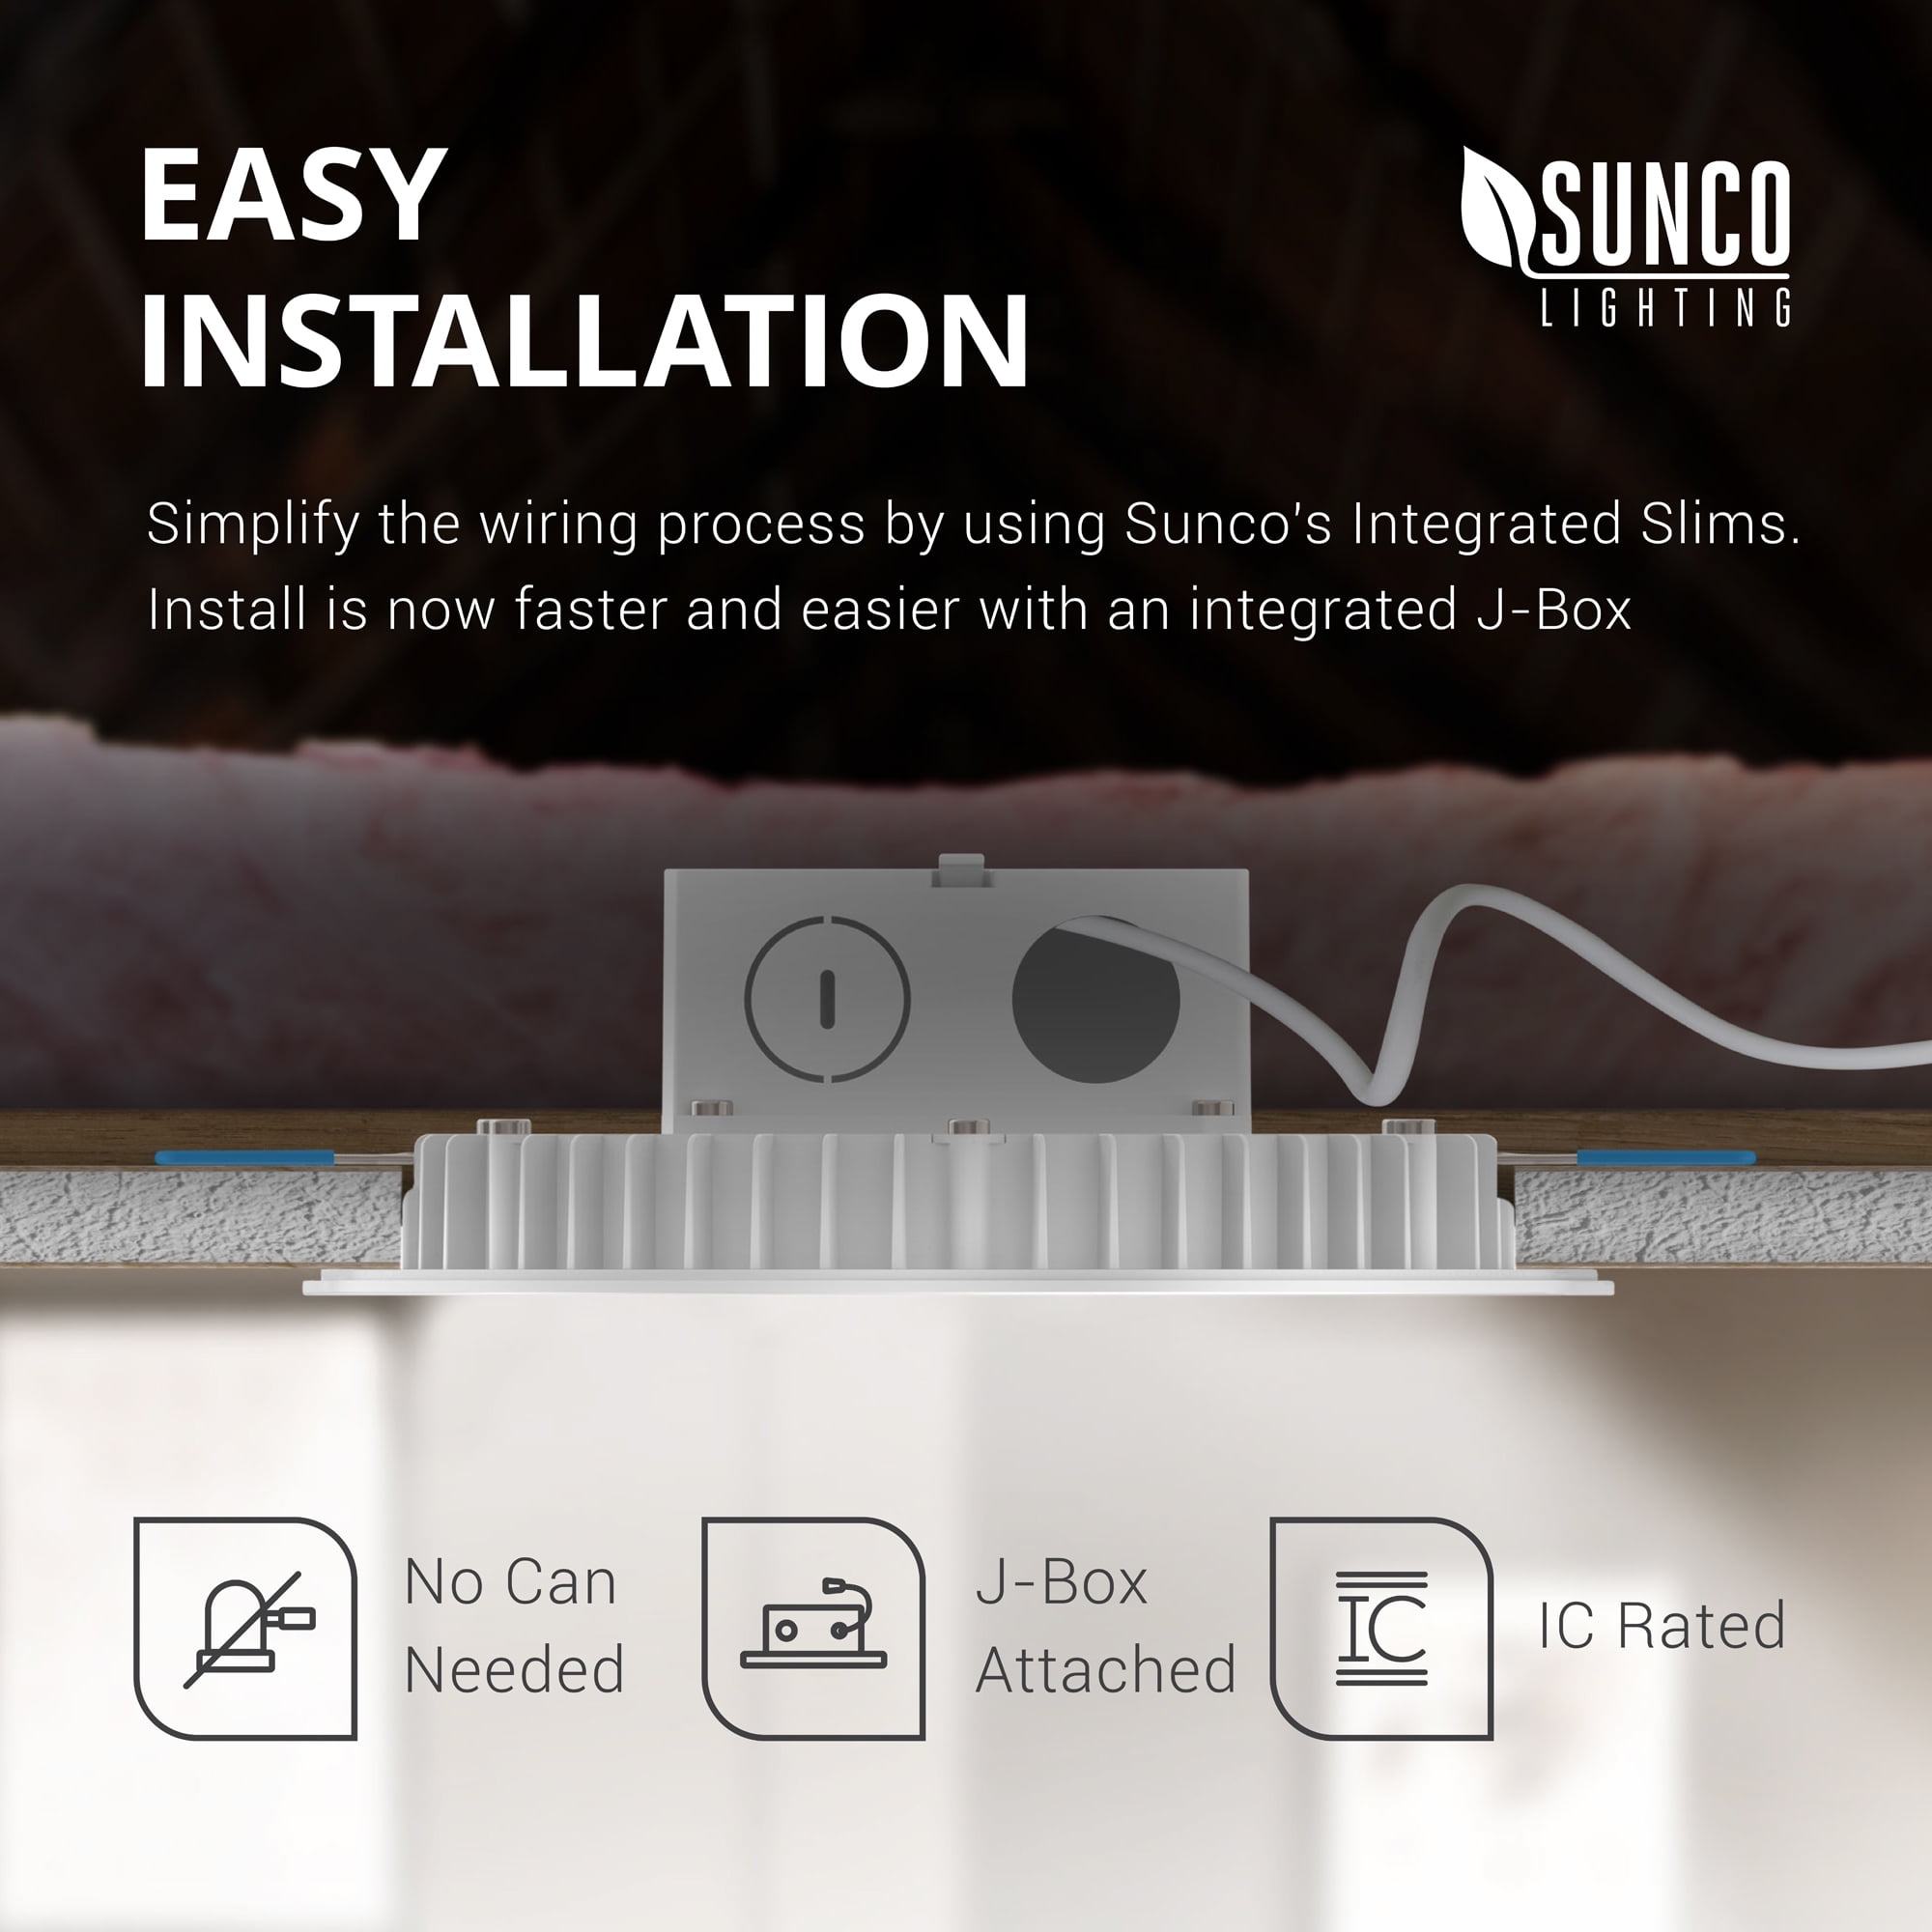 Sunco Lighting 12 Pack Inch Slim LED Downlight, Integrated Junction Box,  14W=100W, 850 LM, Dimmable, 2700K Soft White, Recessed Jbox Fixture, IC  Rated, Retrofit Installation ETL  Energy Star